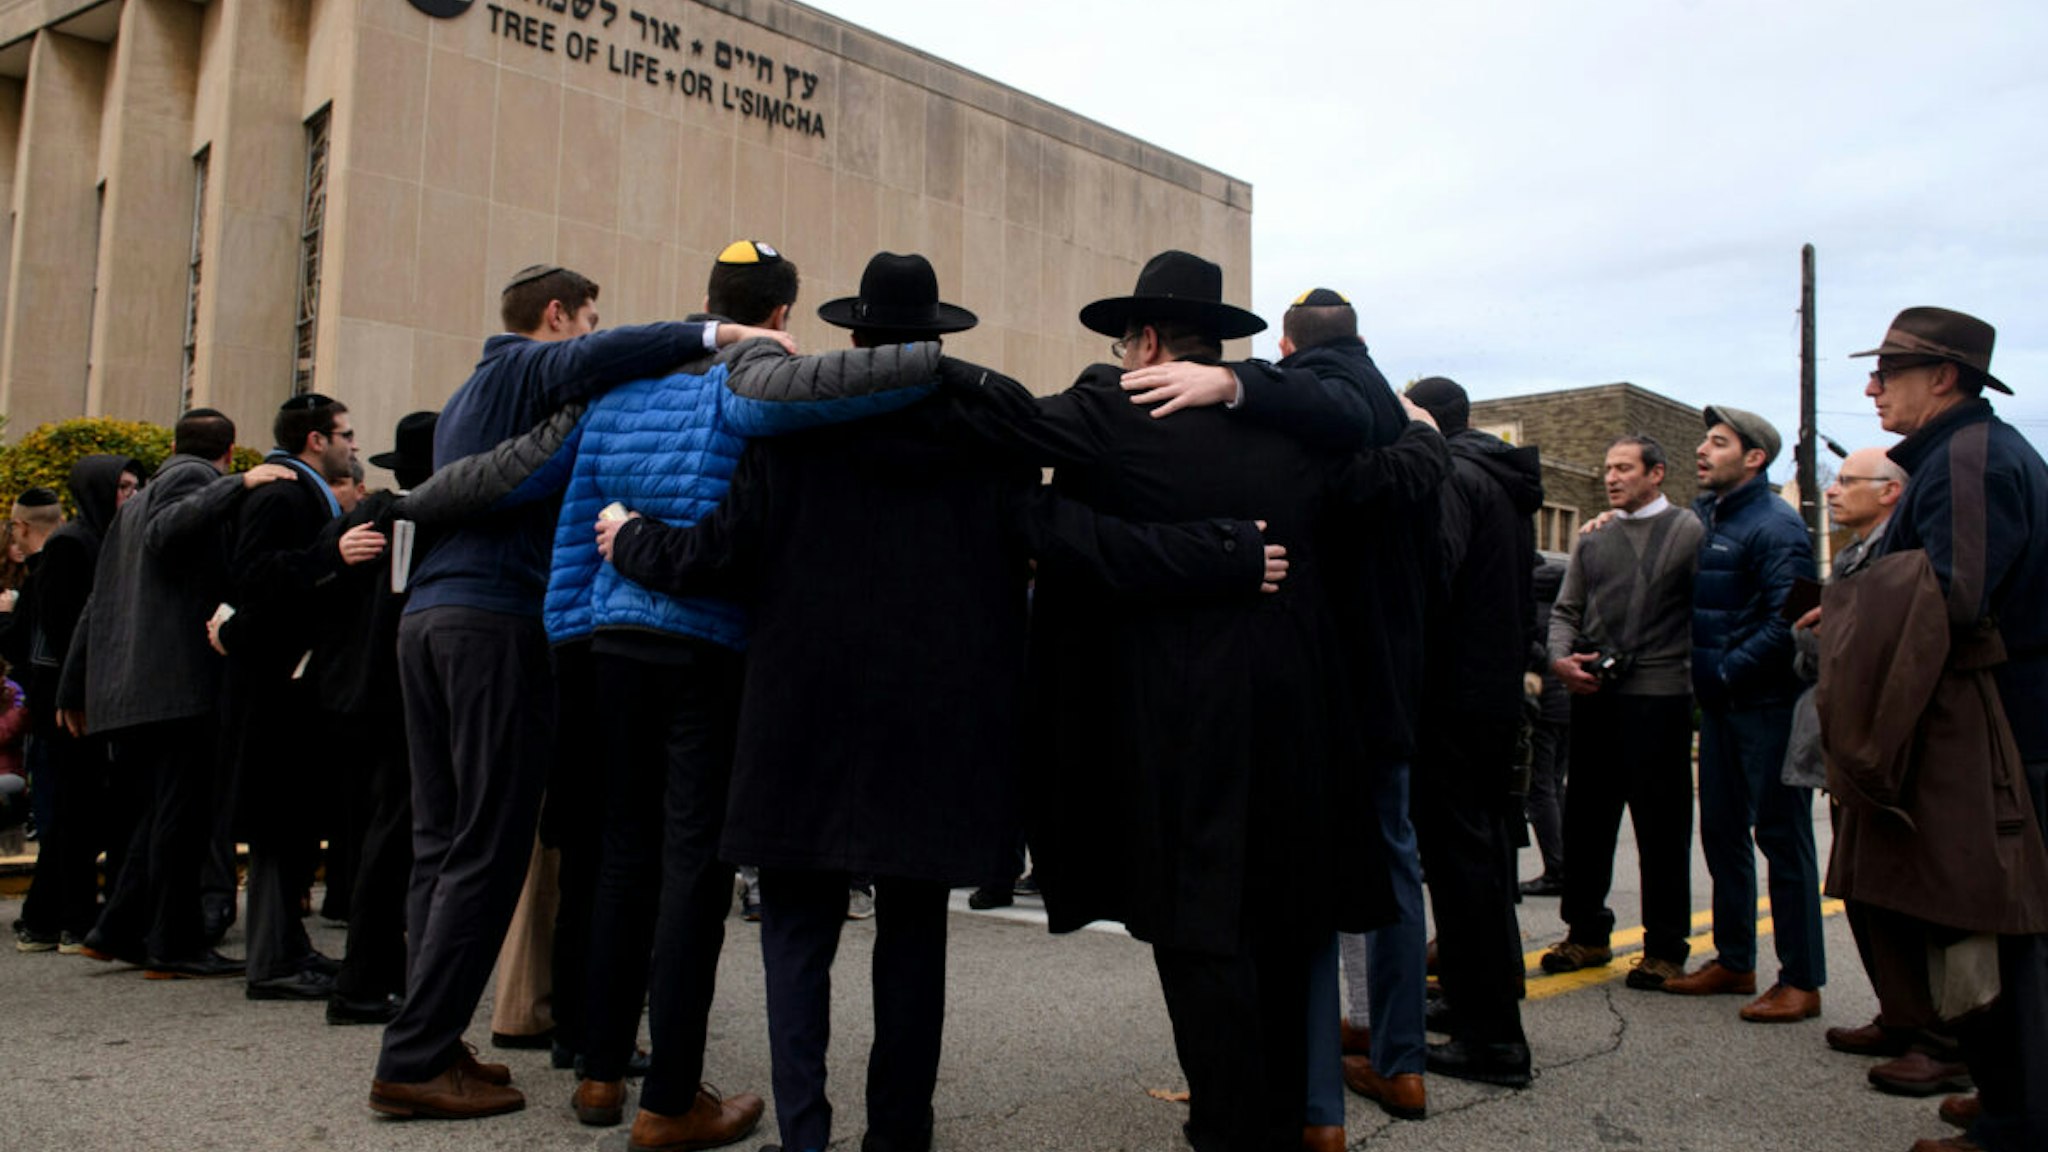 PITTSBURGH, PA - NOV 2: Members of the Jewish faith gather in front of the Tree of Life Synagogue for the Shabbat on Friday evening, November 2, 2018 in Pittsburgh's Squirrel Hill neighborhood. 11 people were killed in a mass shooting at the synagogue on Saturday morning. Six others were injured as well including four police officers who responded to the incident.